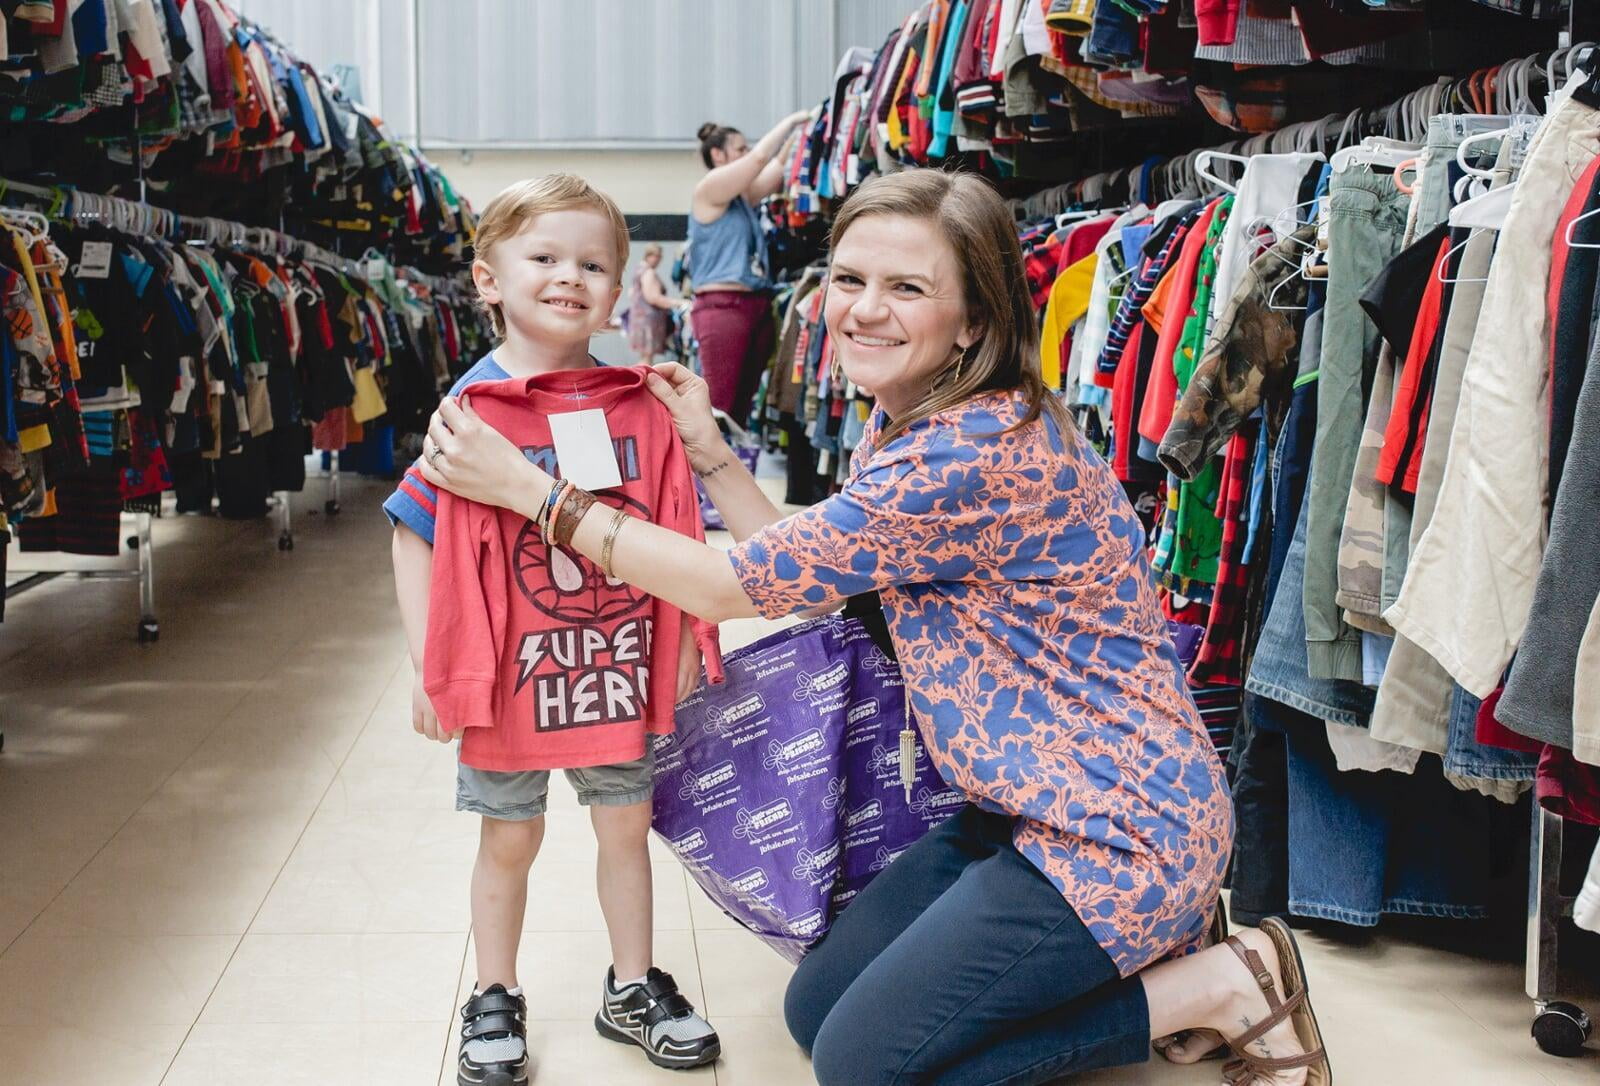 Mom holds up shirt to young boy to assess fit.